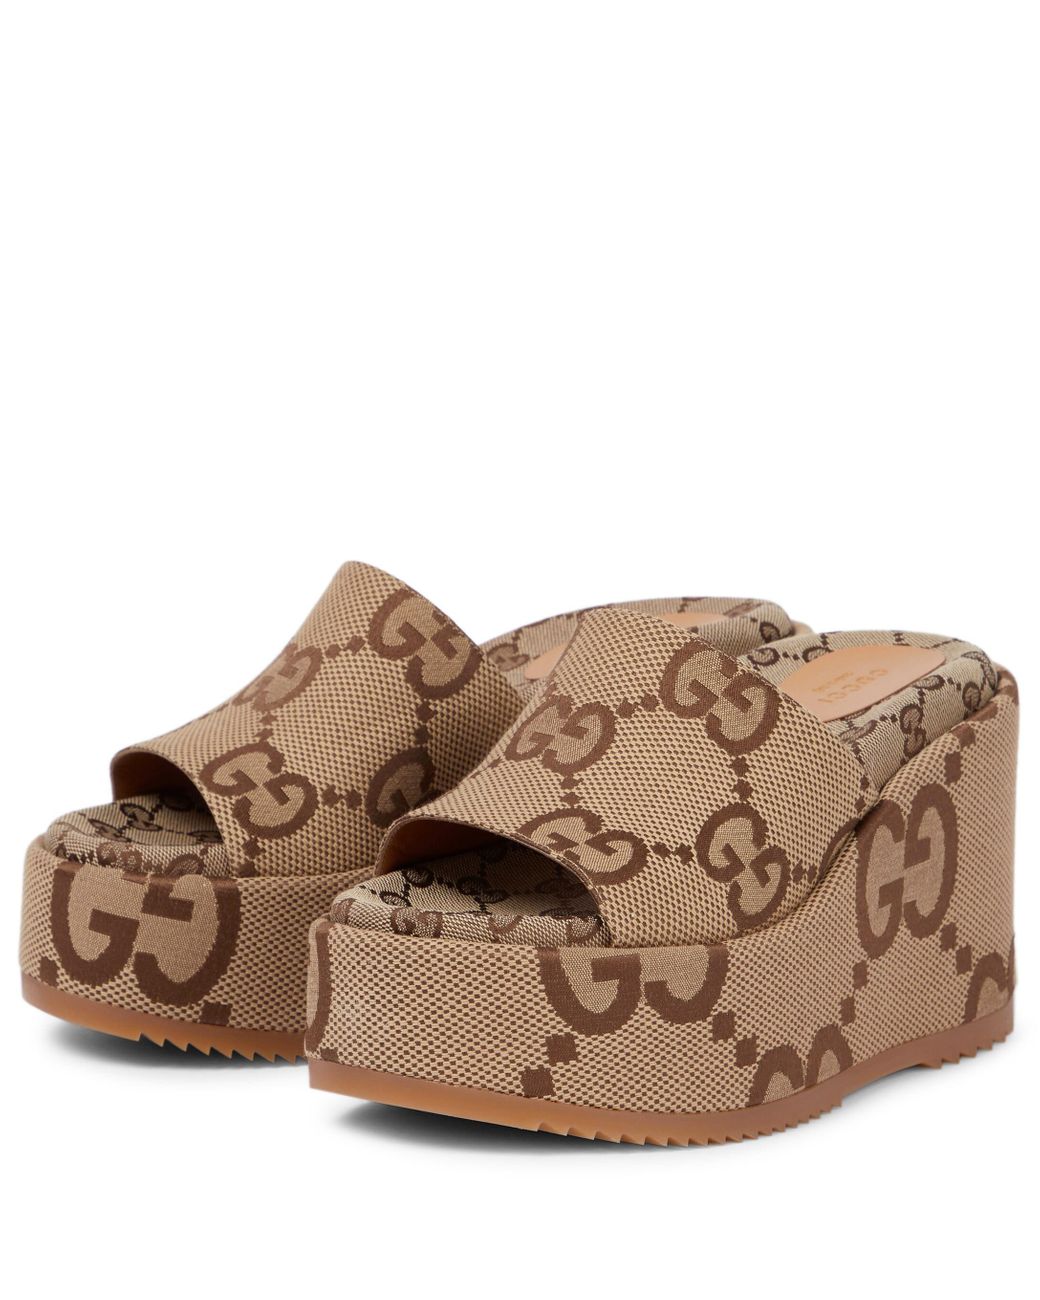 Gucci Jumbo GG Wedge Platform Sandals in Brown | Lyst Canada